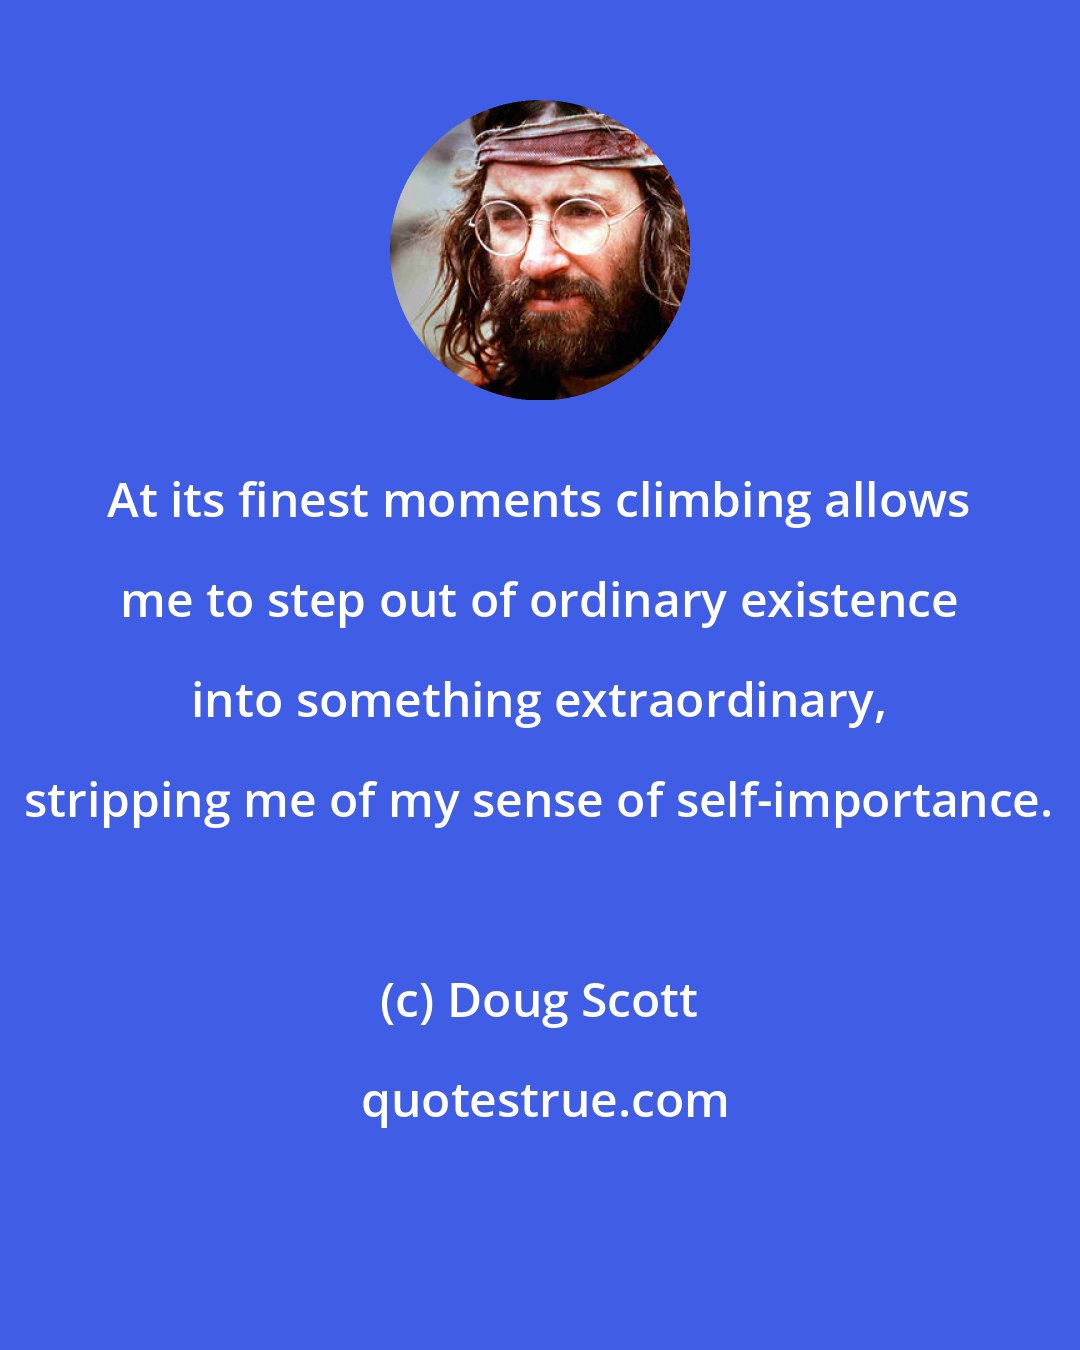 Doug Scott: At its finest moments climbing allows me to step out of ordinary existence into something extraordinary, stripping me of my sense of self-importance.